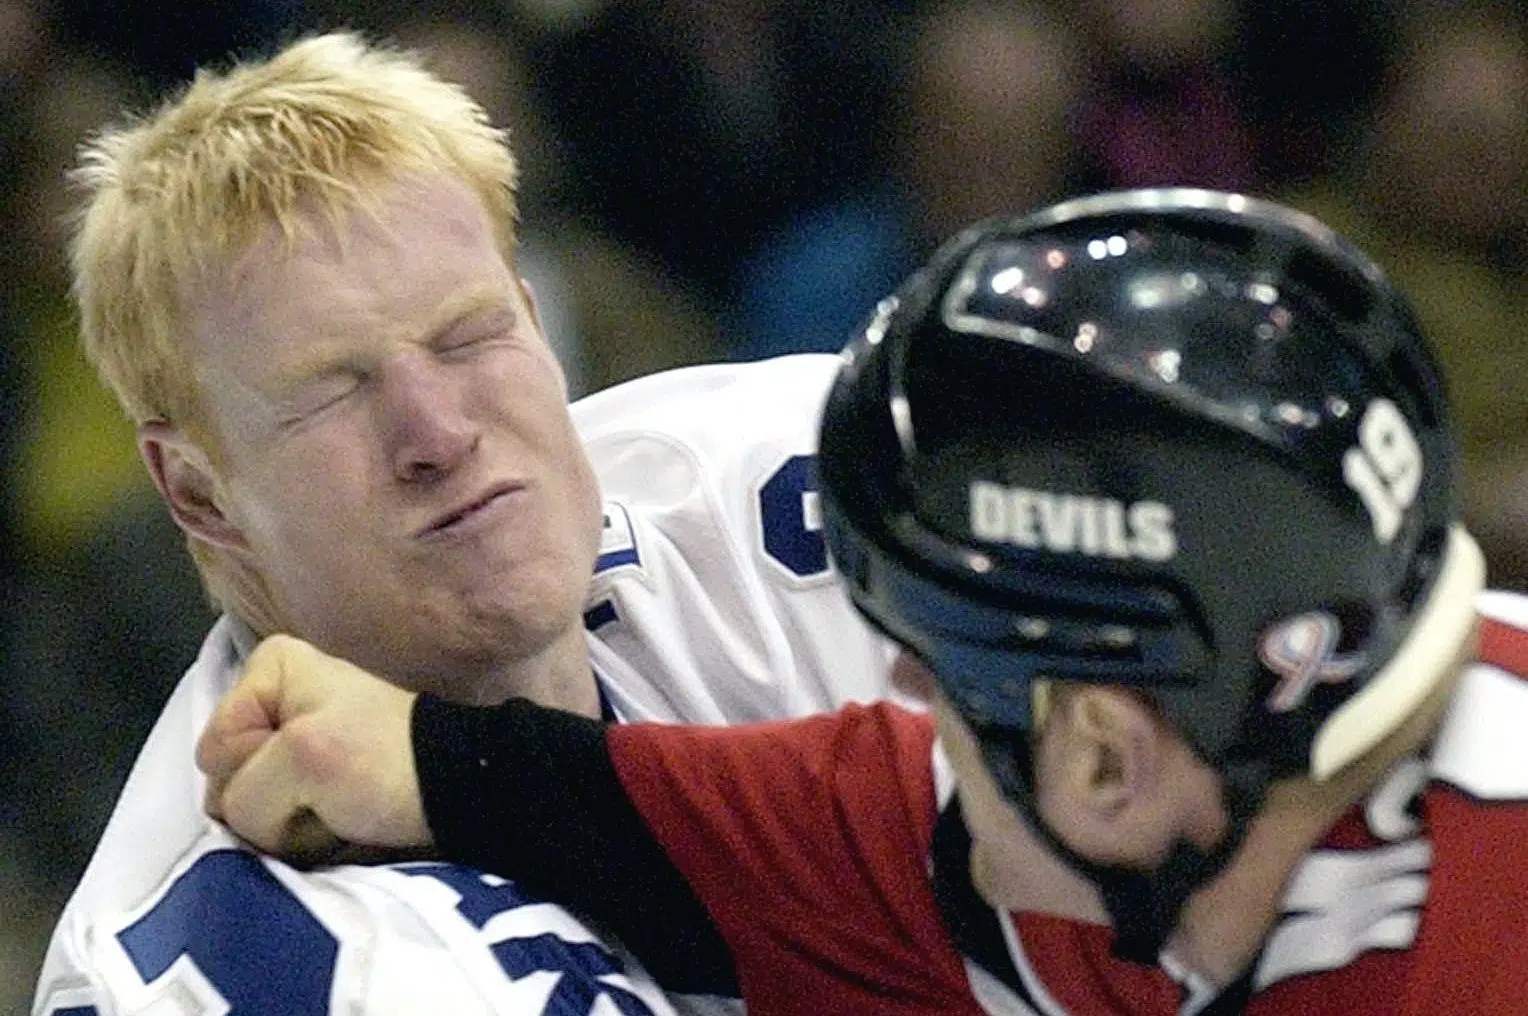 Faces of concussions: NHL’s head-on battle with an epidemic